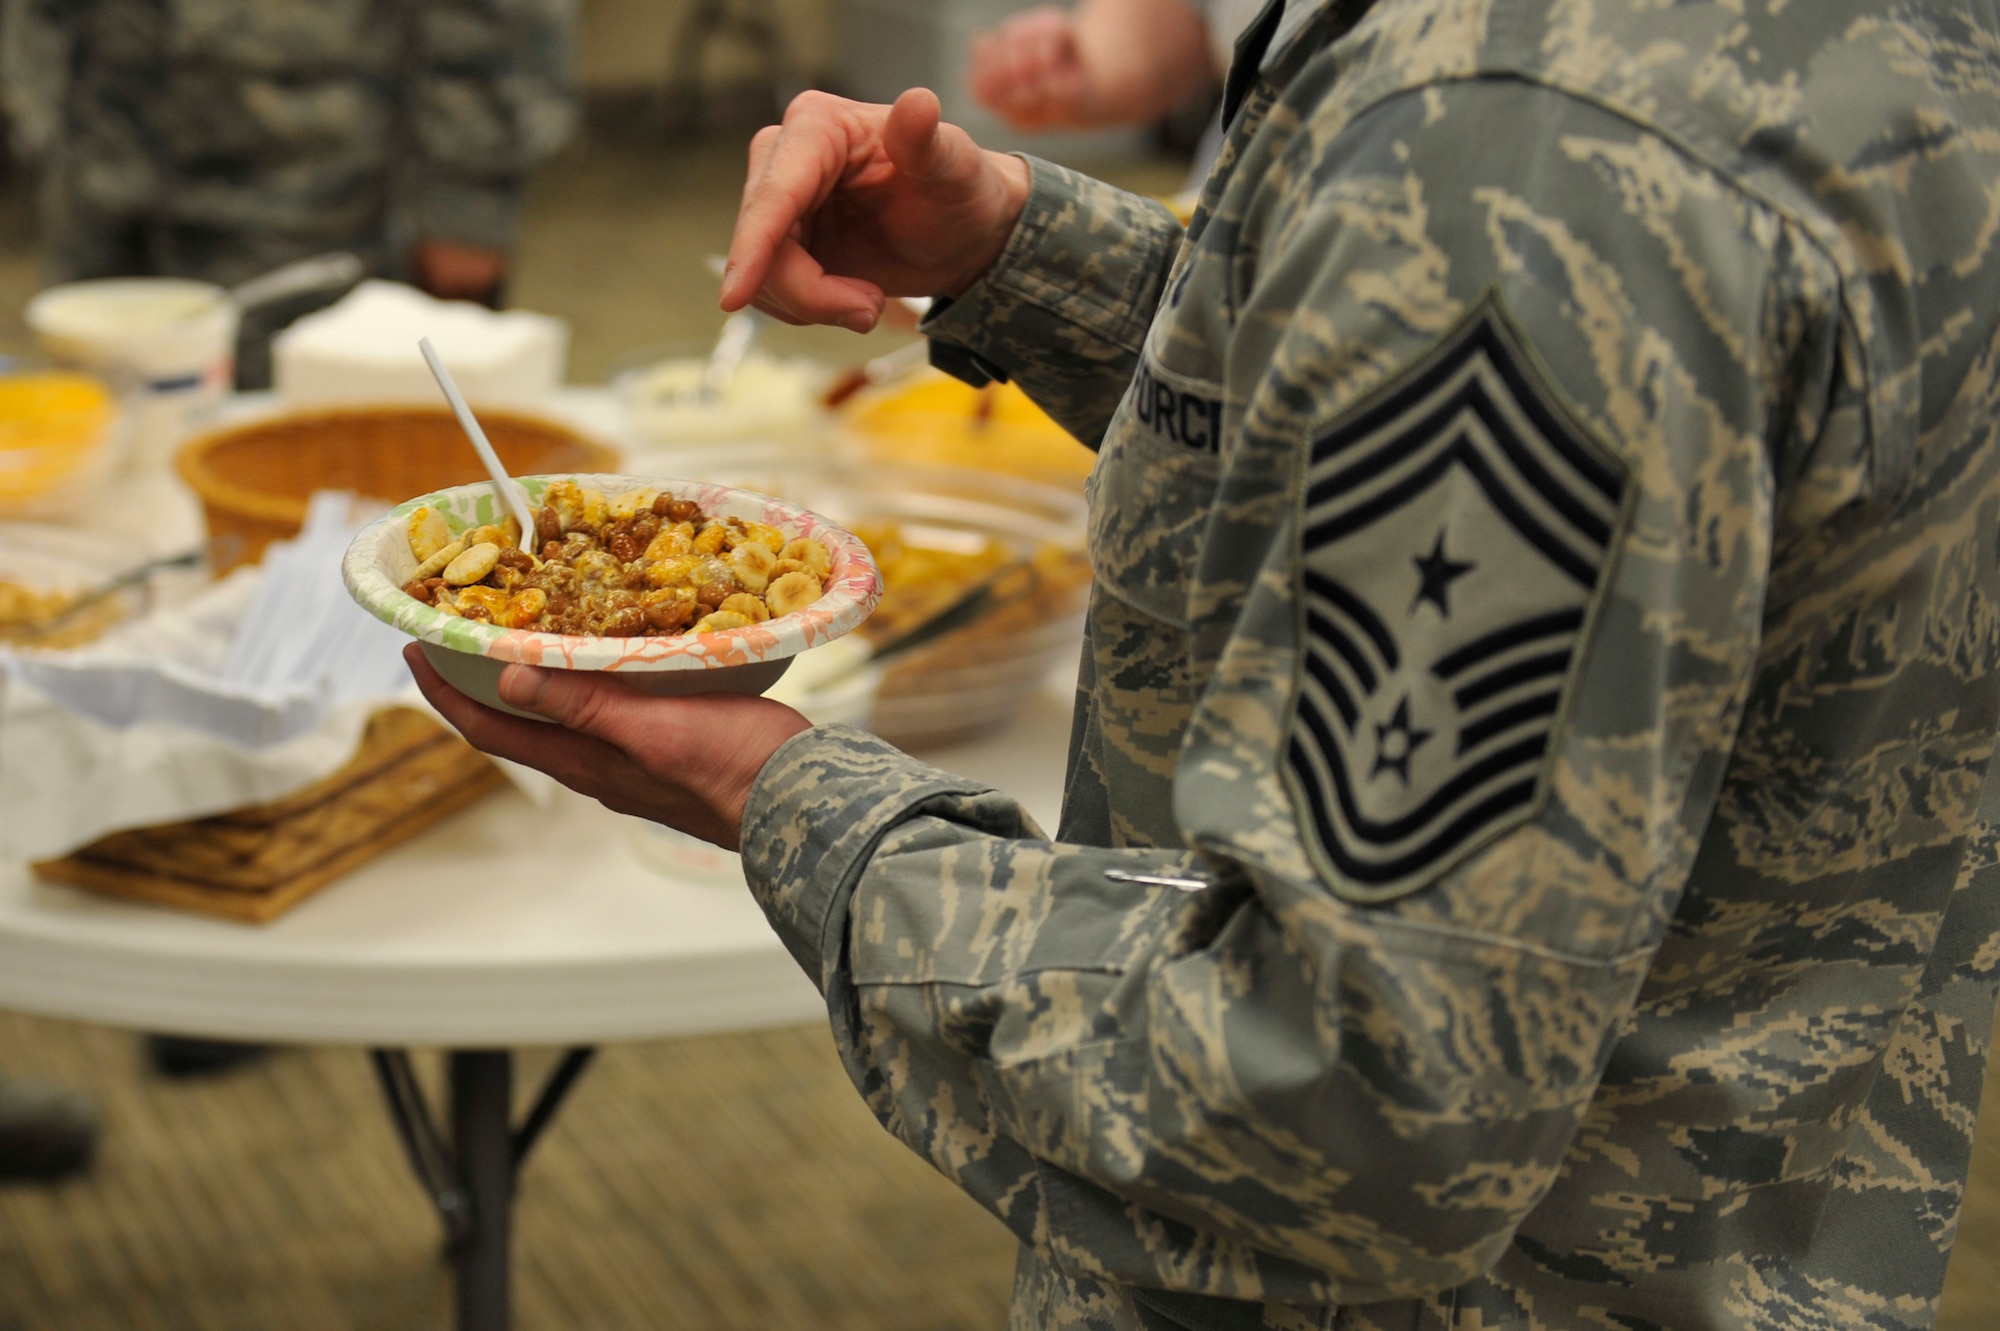 Chief Master Sgt. William Ward, 460th Space Wing command chief, samples a bowl of chili at the 10th Annual Chili Cook-Off hosted by the Buckley Air Force Base Chapel Feb. 6, 2013, at the chapel Fellowship Hall. Following the chili cook-off, Team Buckley members were invited to partake in the chili as part of the monthly chapel luncheon. (U.S. Air Force photo by Airman 1st Class Riley Johnson/Released)